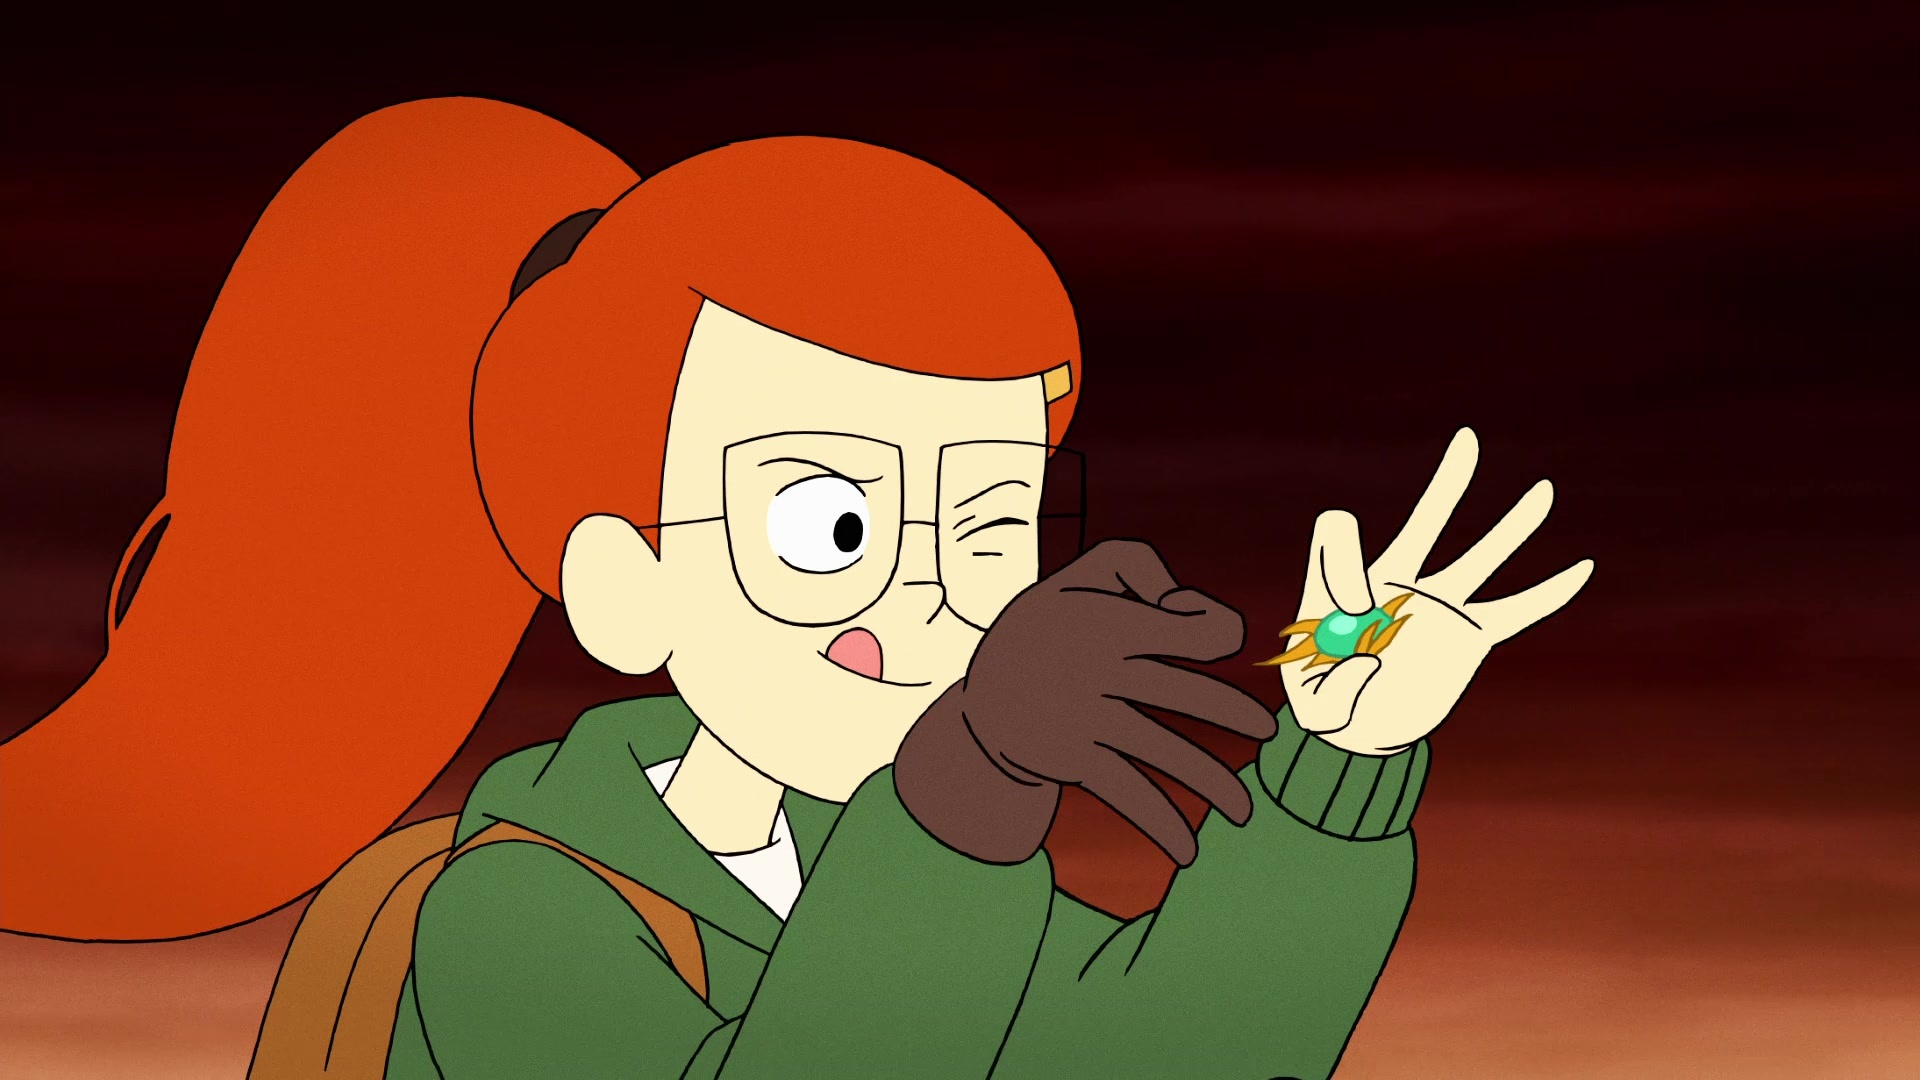 Infinity Train: Tulip, A passenger searching for a way home with One-One and Atticus. 1920x1080 Full HD Wallpaper.